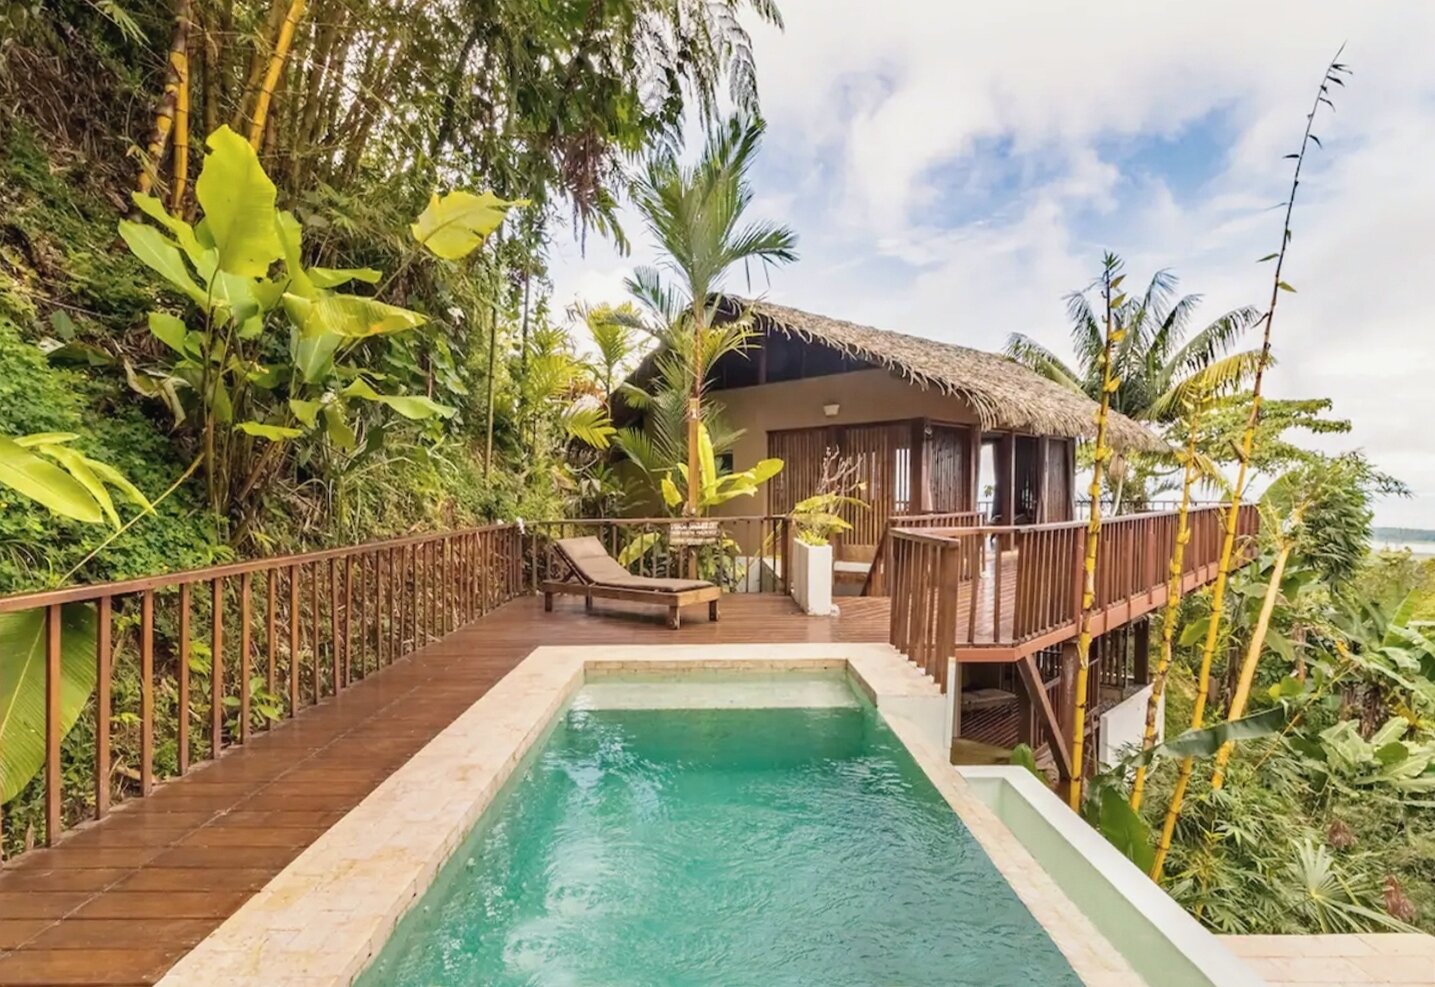 One of the most rewarding things of running an off-the-beaten track ecolodge from afar is getting to wake up here in Europe and read a little bit about our guests Pura Vida Experiences - this one just in on Airbnb. Thanks so much Aurelie &amp; Mike @